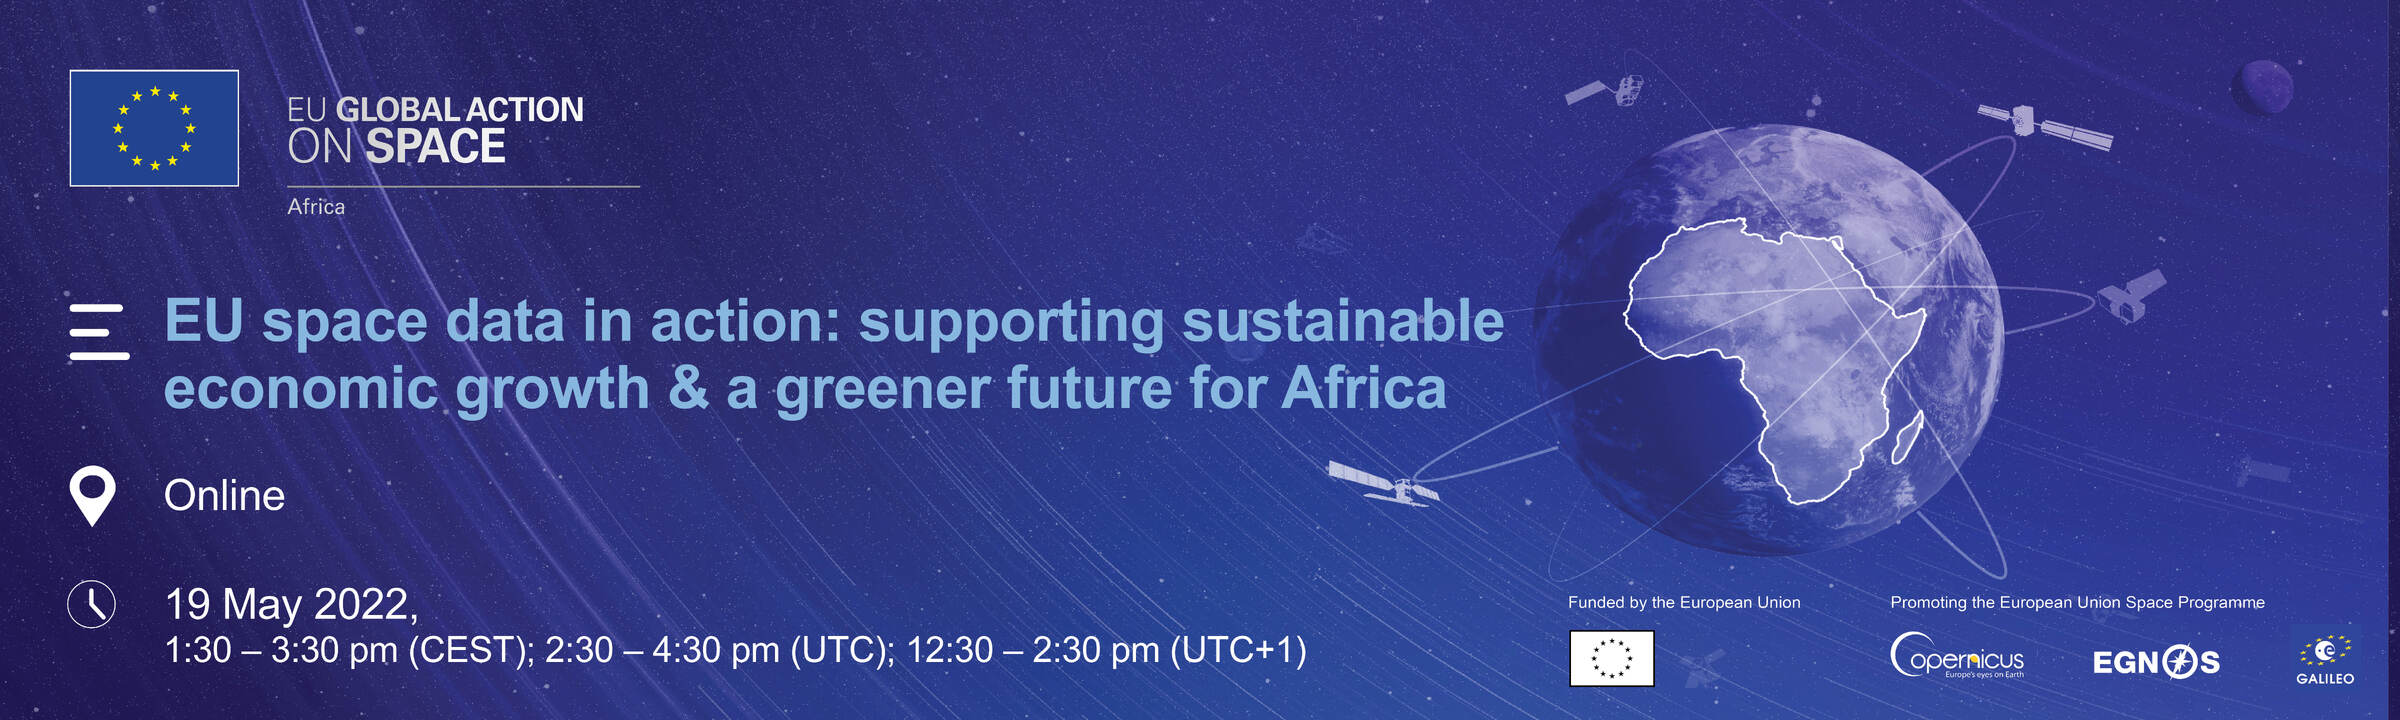 EU space data in action: supporting sustainable economic growth & a greener future for Africa